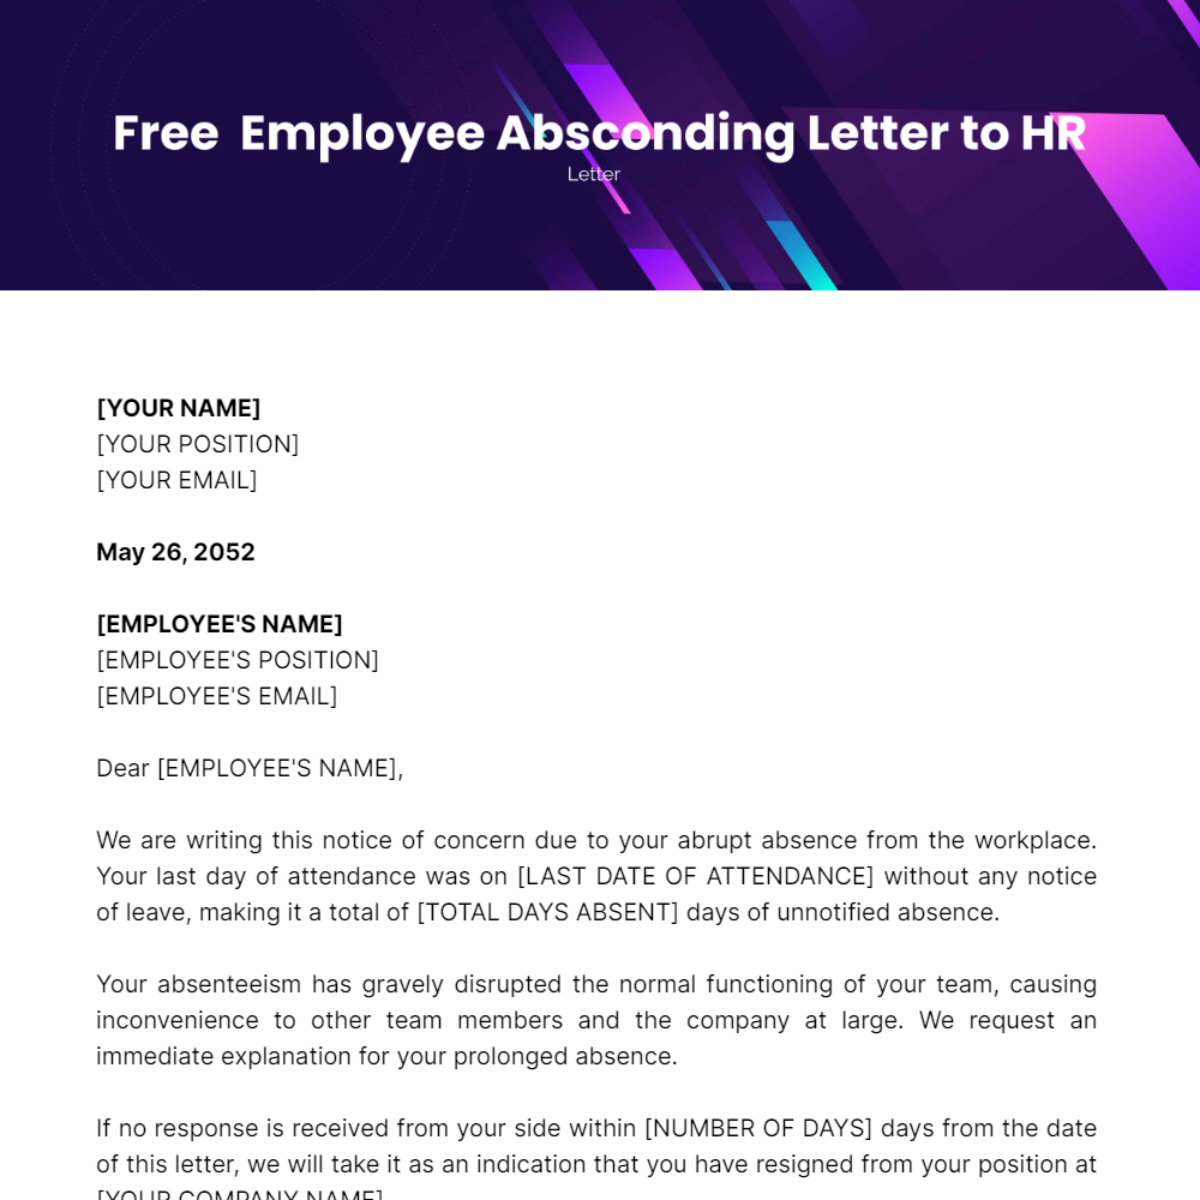 Employee Absconding Letter to HR Template